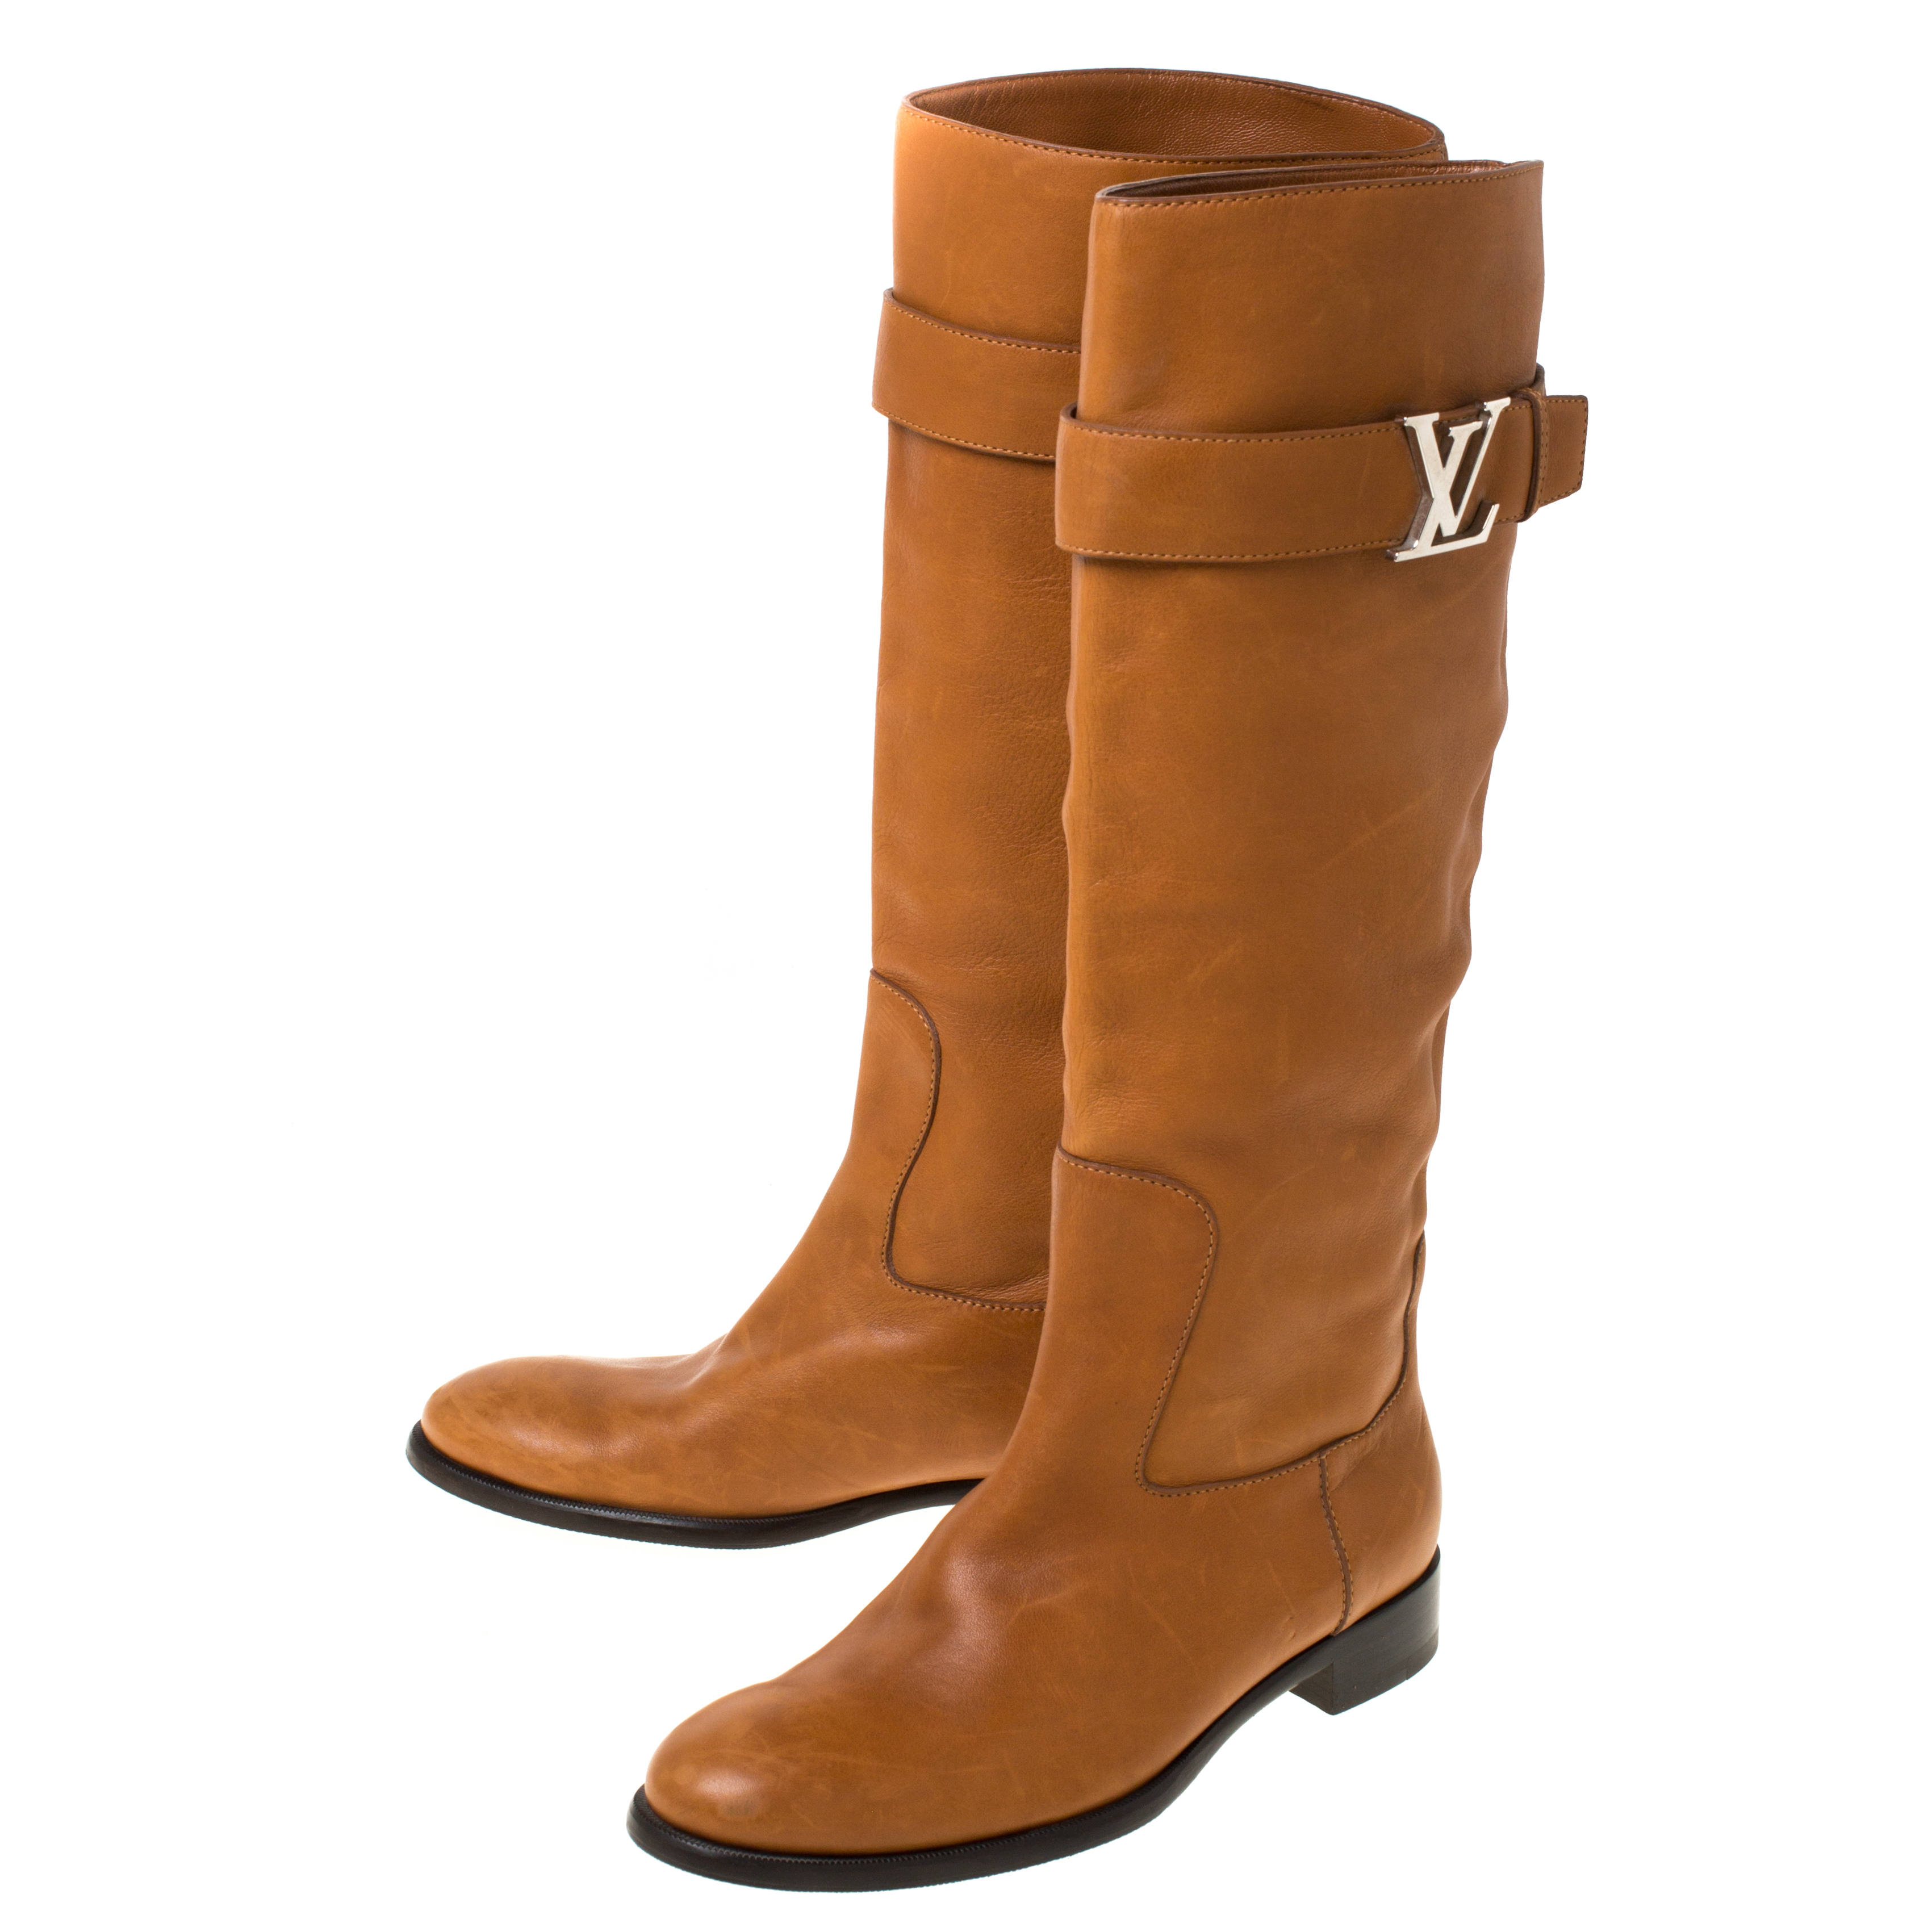 Louis Vuitton Legacy Ankle Boot CAMEL. Size 38.0